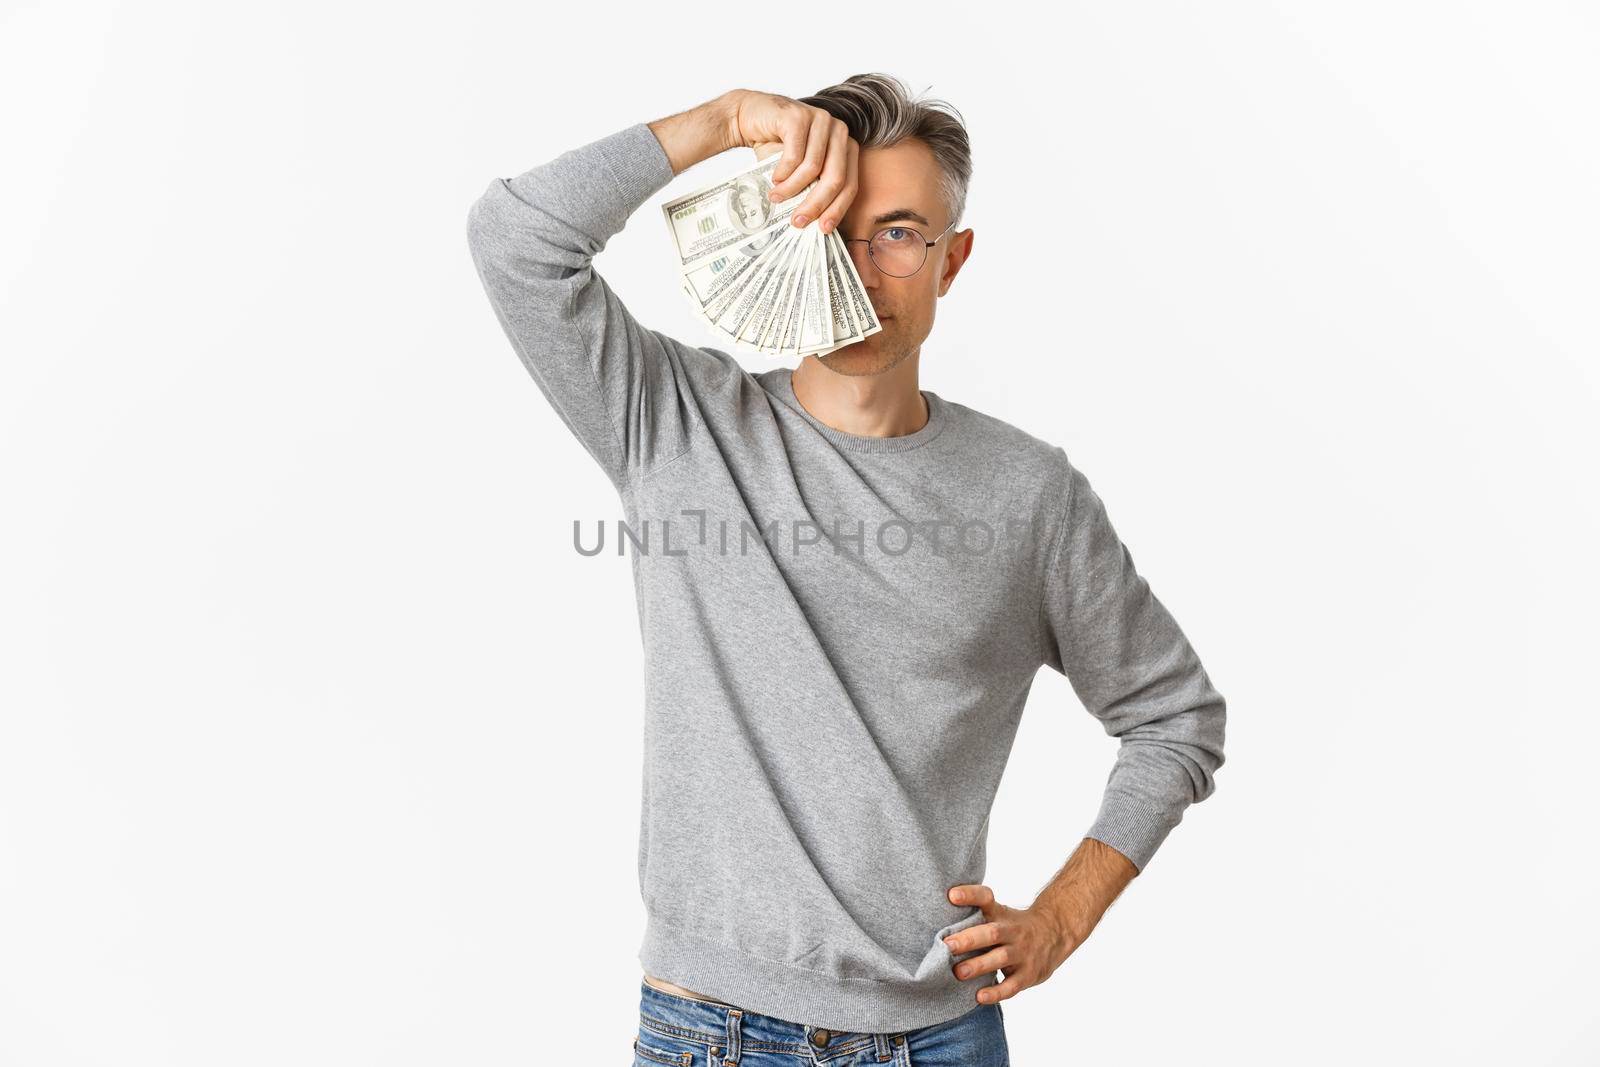 Portrait of successful and rich middle-aged man in gray sweater, showing money, standing over white background.